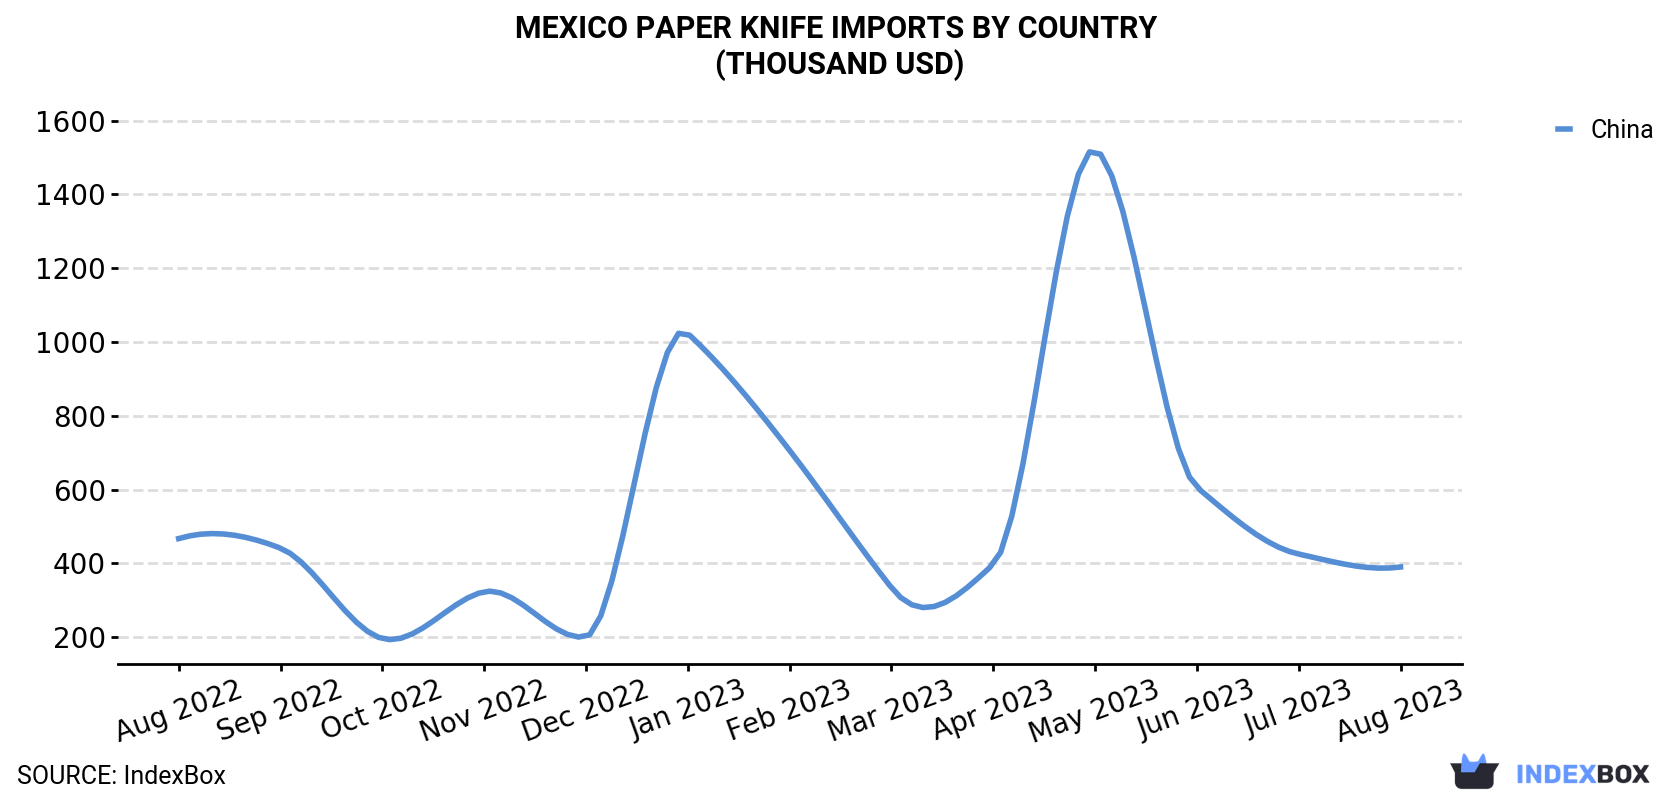 Mexico Paper Knife Imports By Country (Thousand USD)